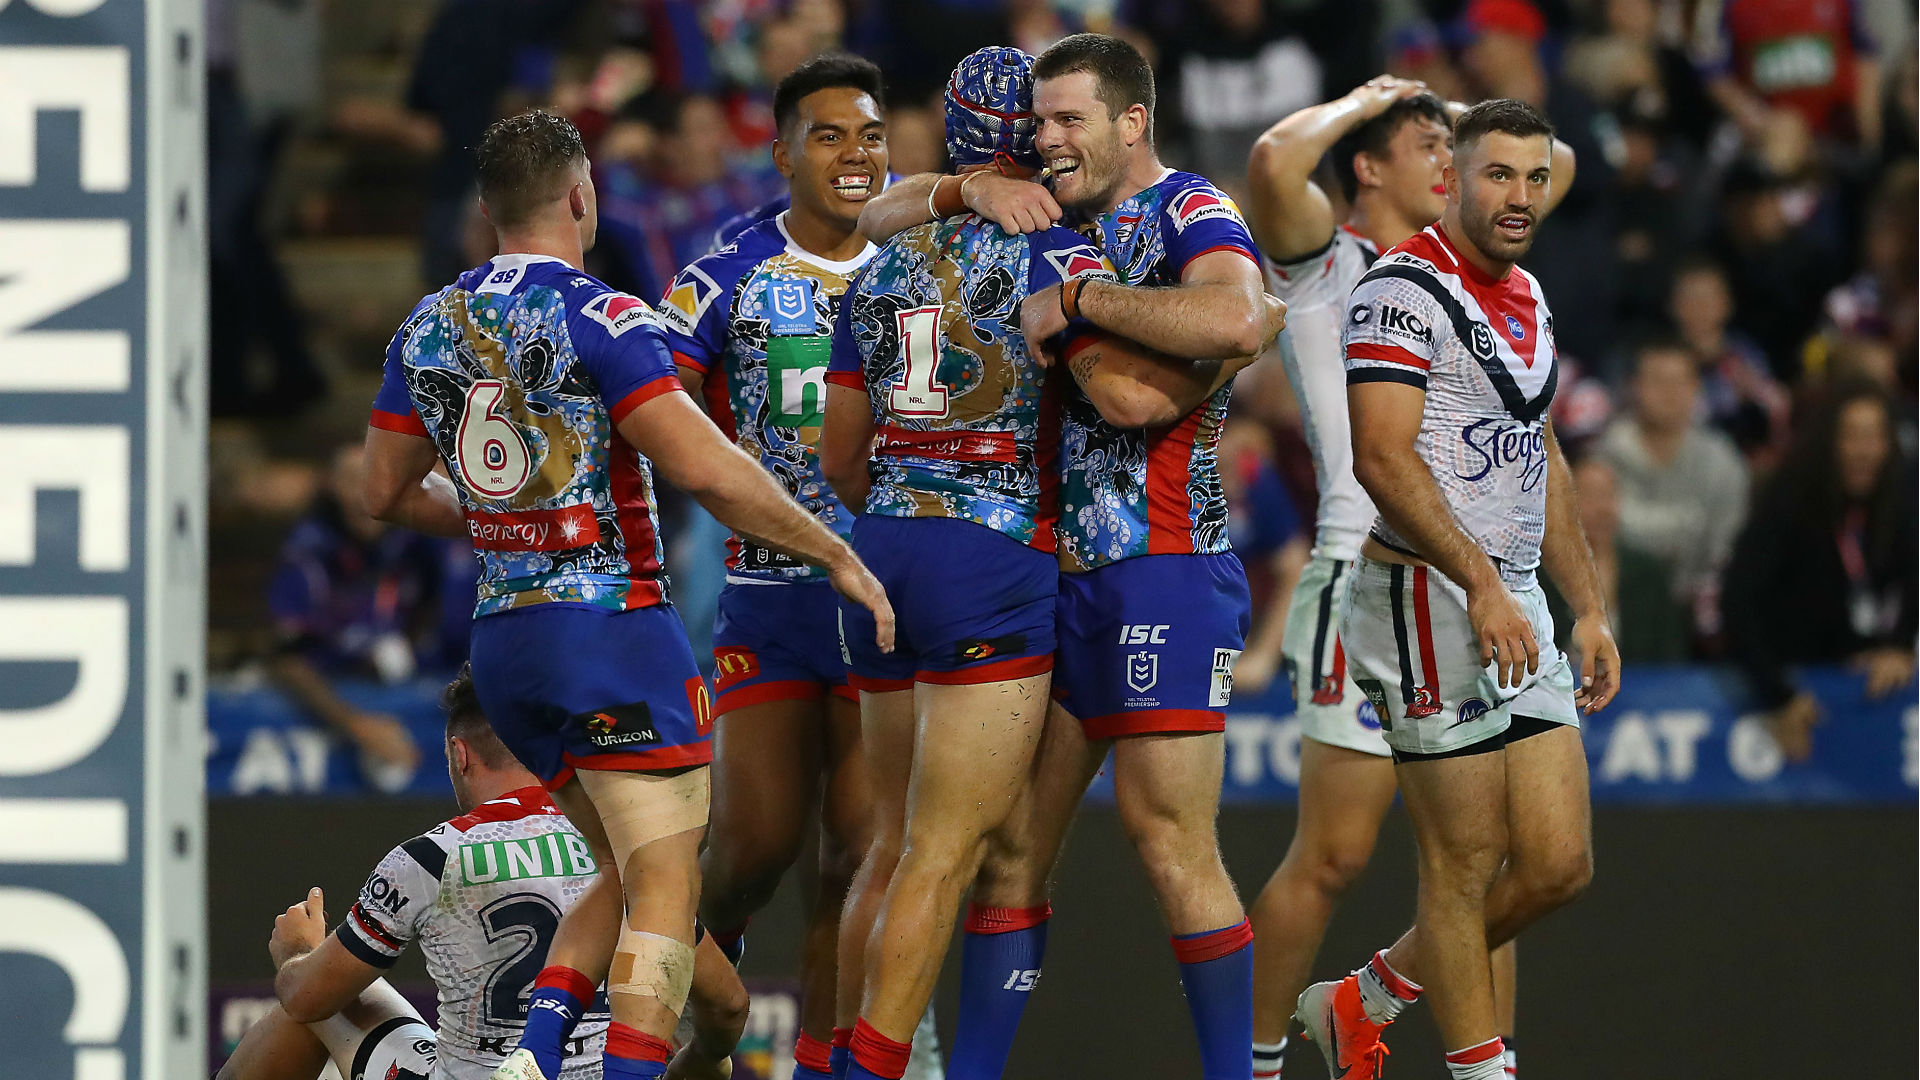 Cooper Cronk was rested for Sydney Roosters' clash with Newcastle Knights, and his side were thrashed 38-12 in Friday's NRL encounter.